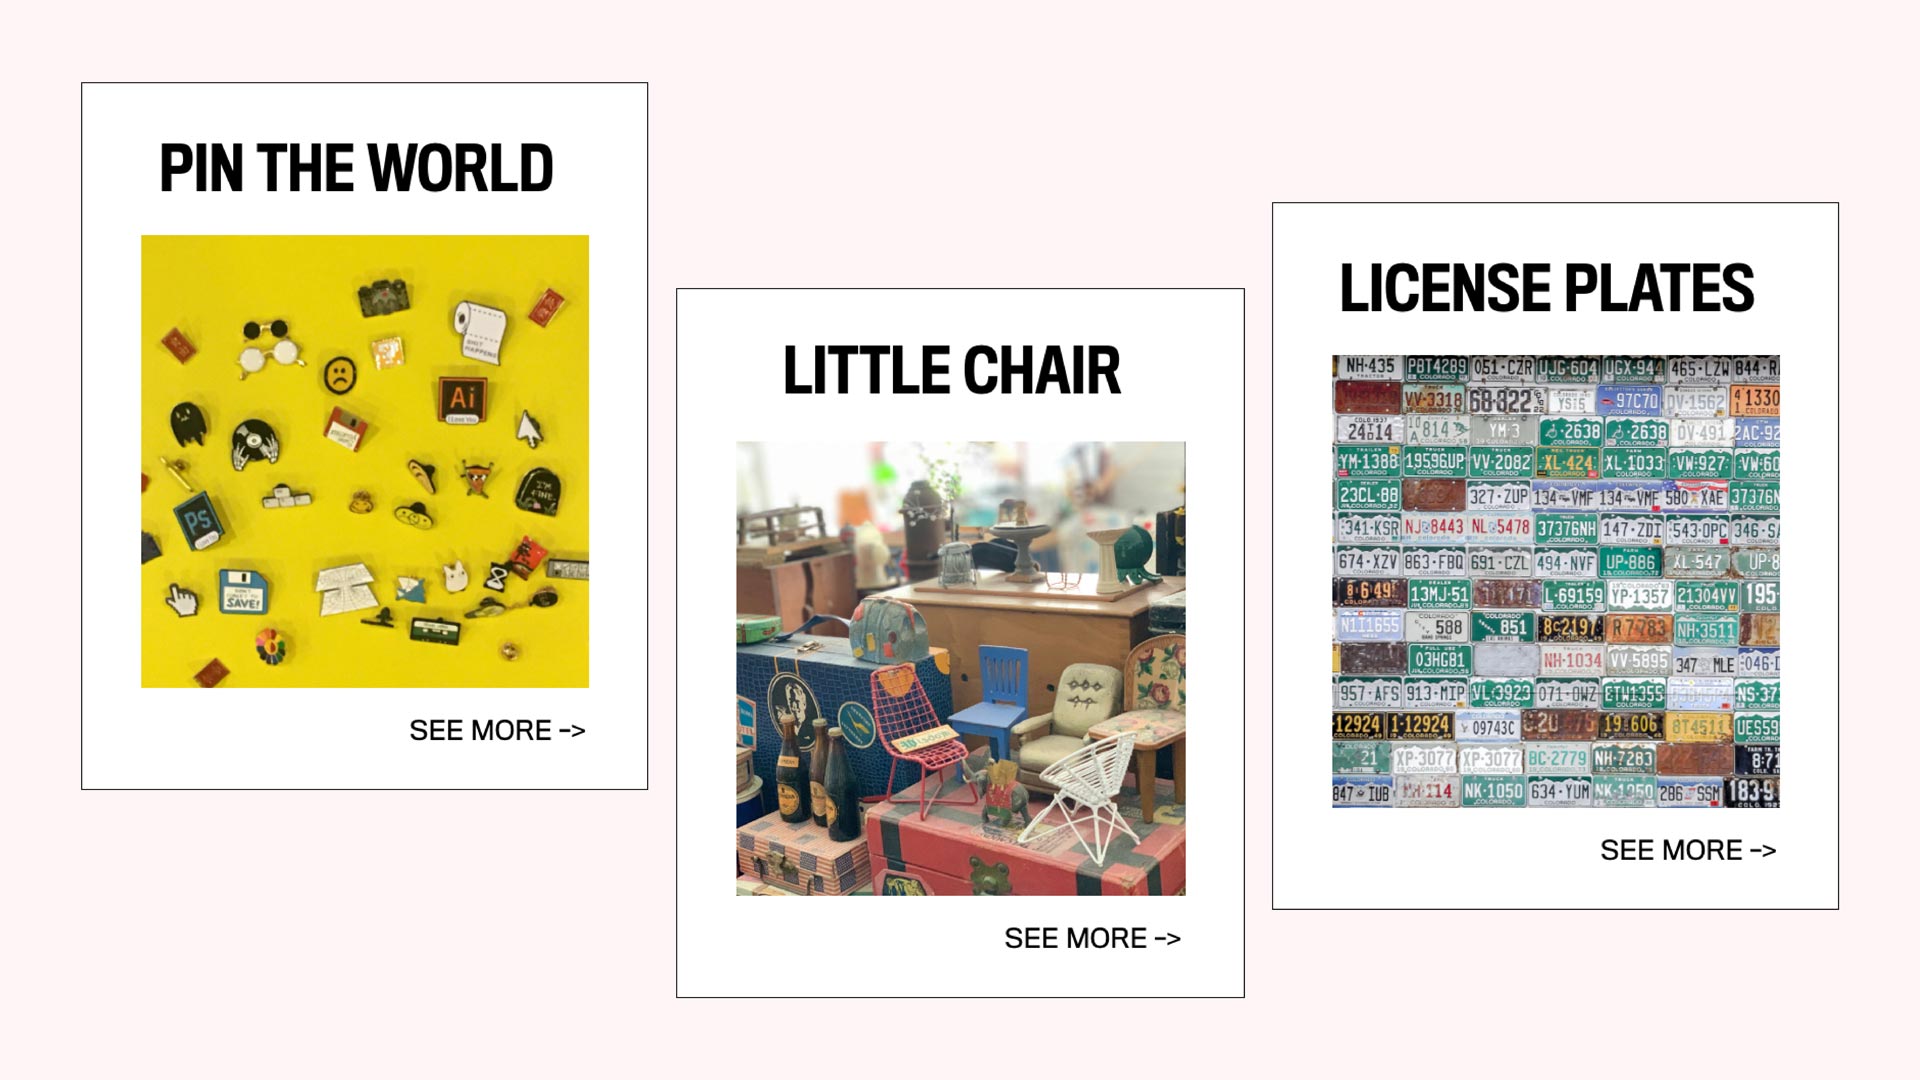 UI options to choose from rare collections of Pins, Chairs and License Plates